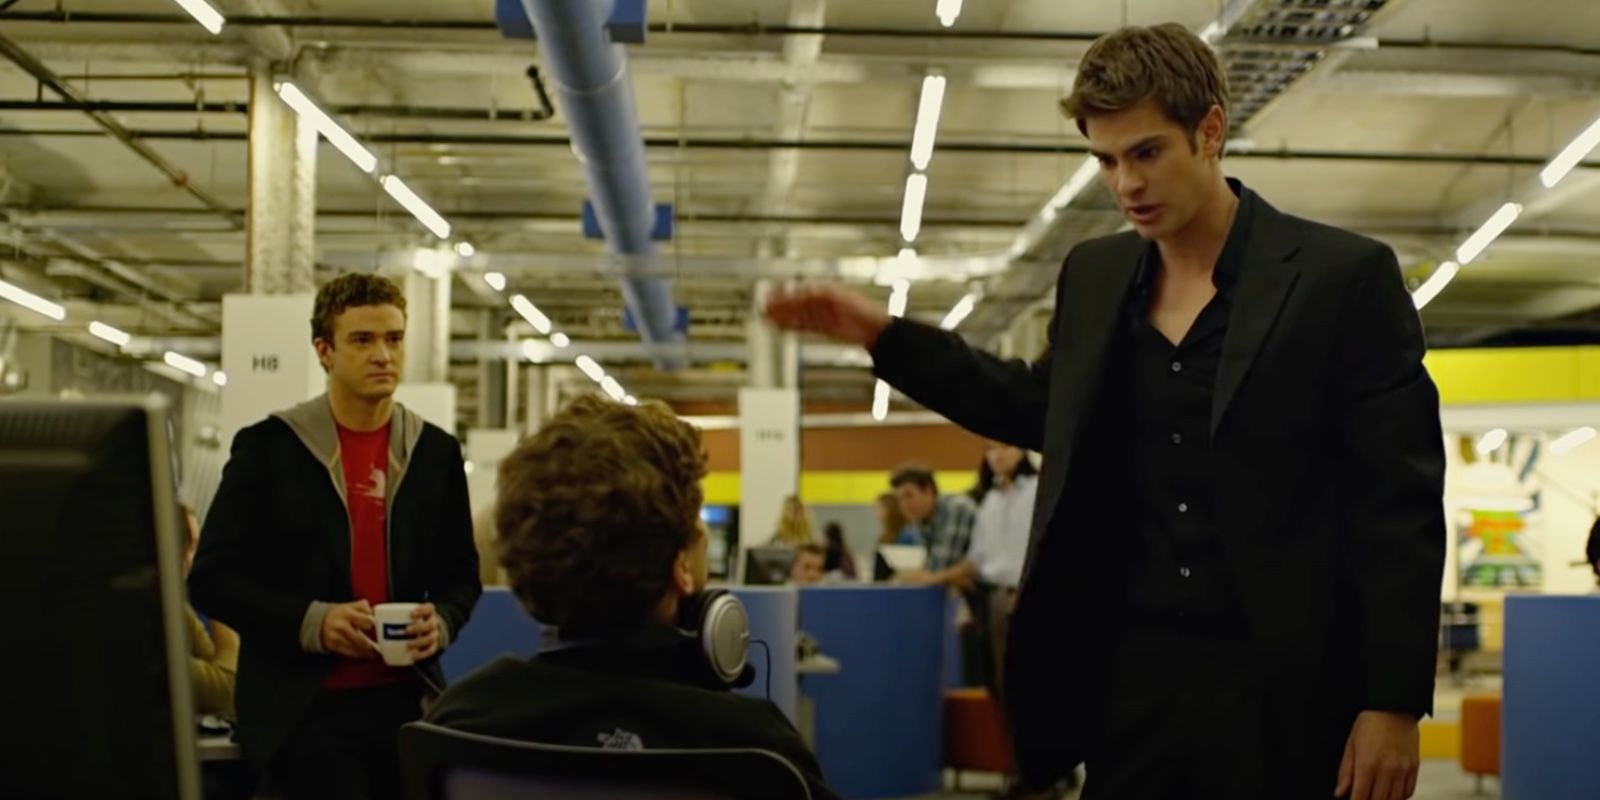 The Social Network Andrew Garfield and Justin Timberlake